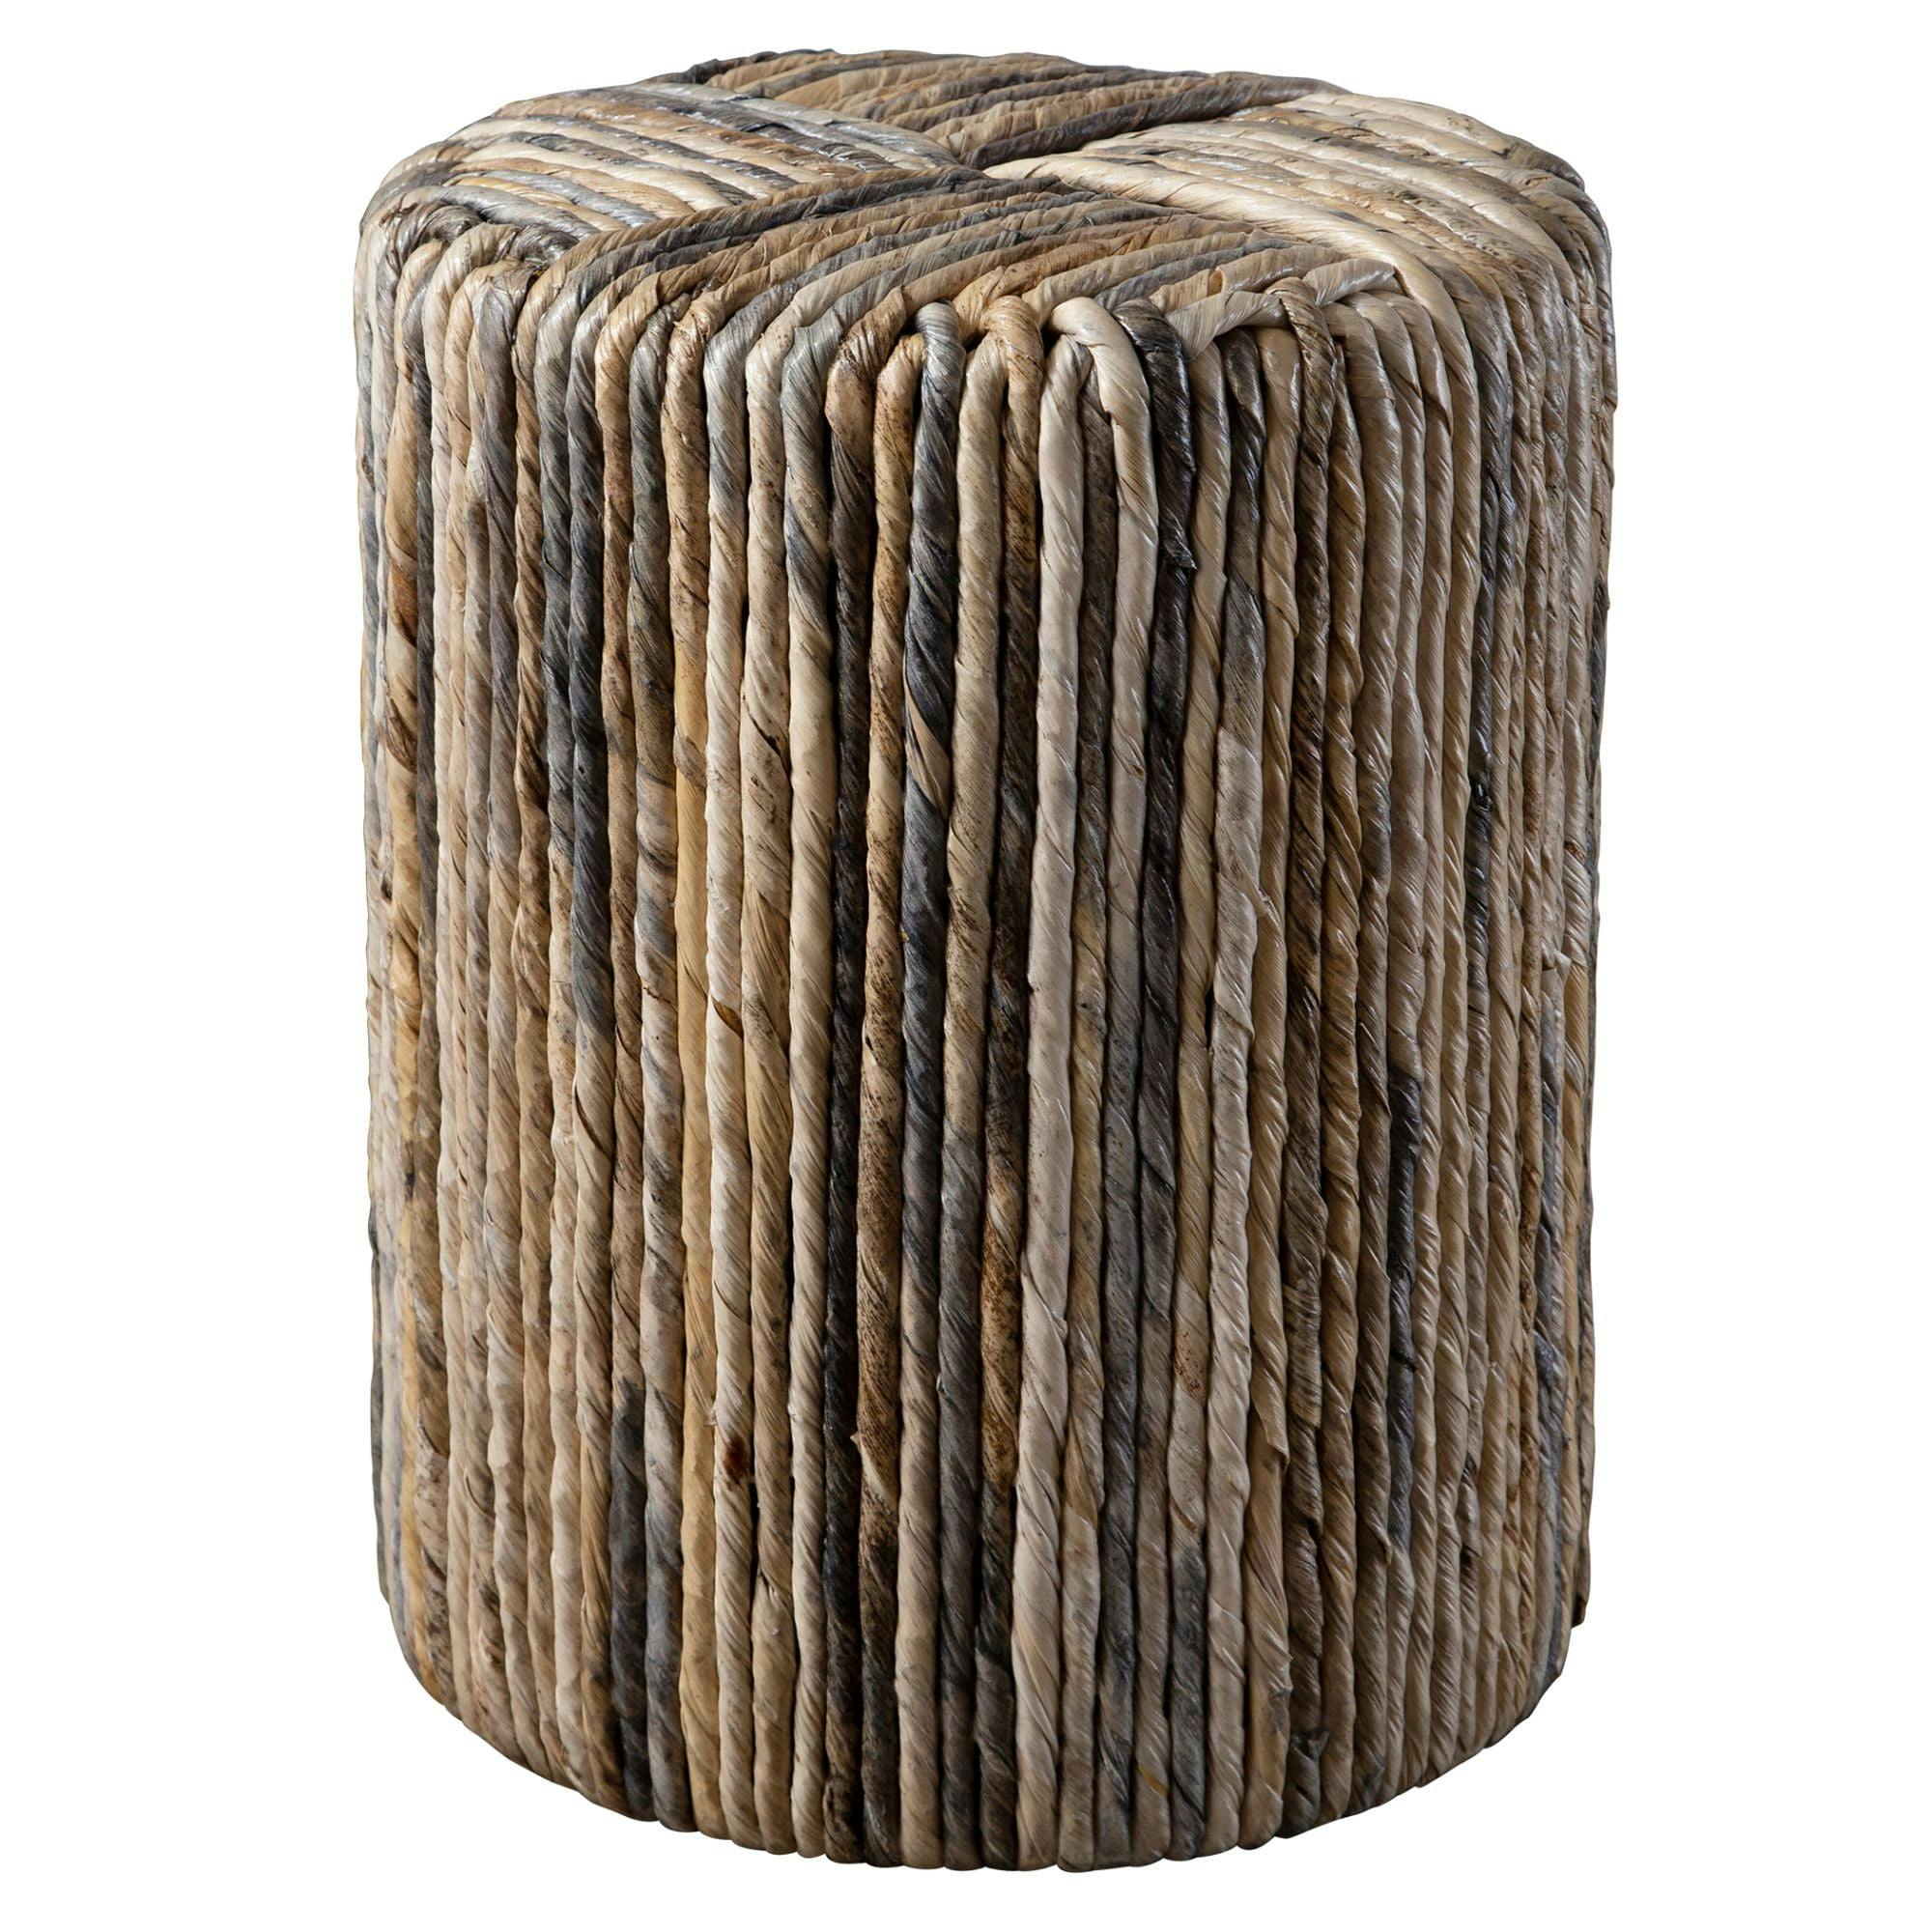 Coastal Charm Round Woven Banana Leaf Accent Stool in Gray